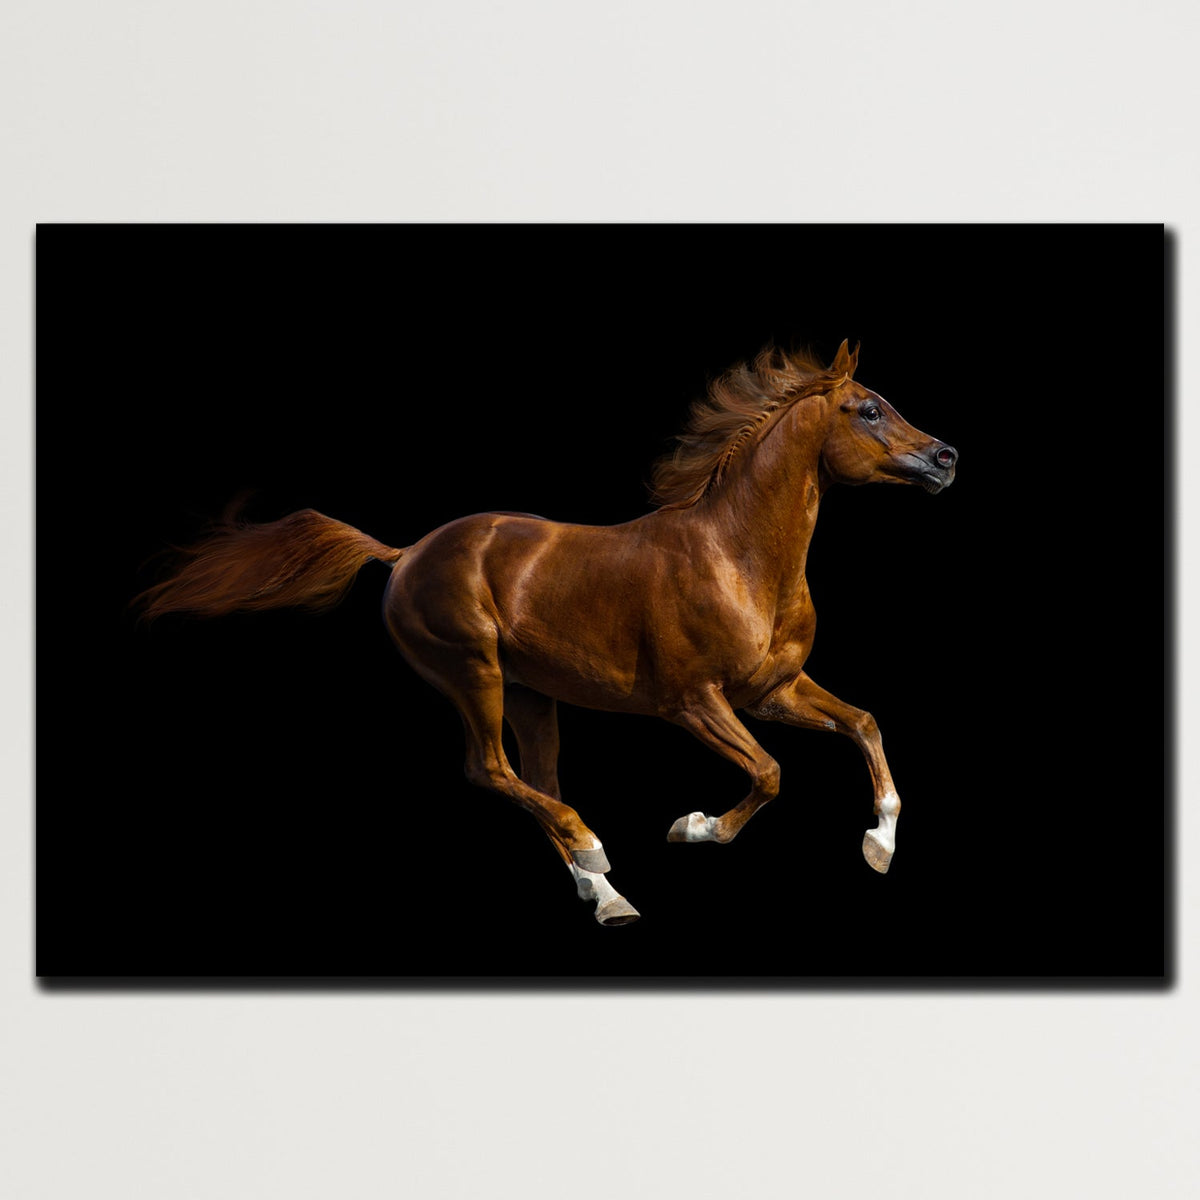 https://cdn.shopify.com/s/files/1/0387/9986/8044/products/ChestnutHorseCanvasArtprintStretched-Plain.jpg